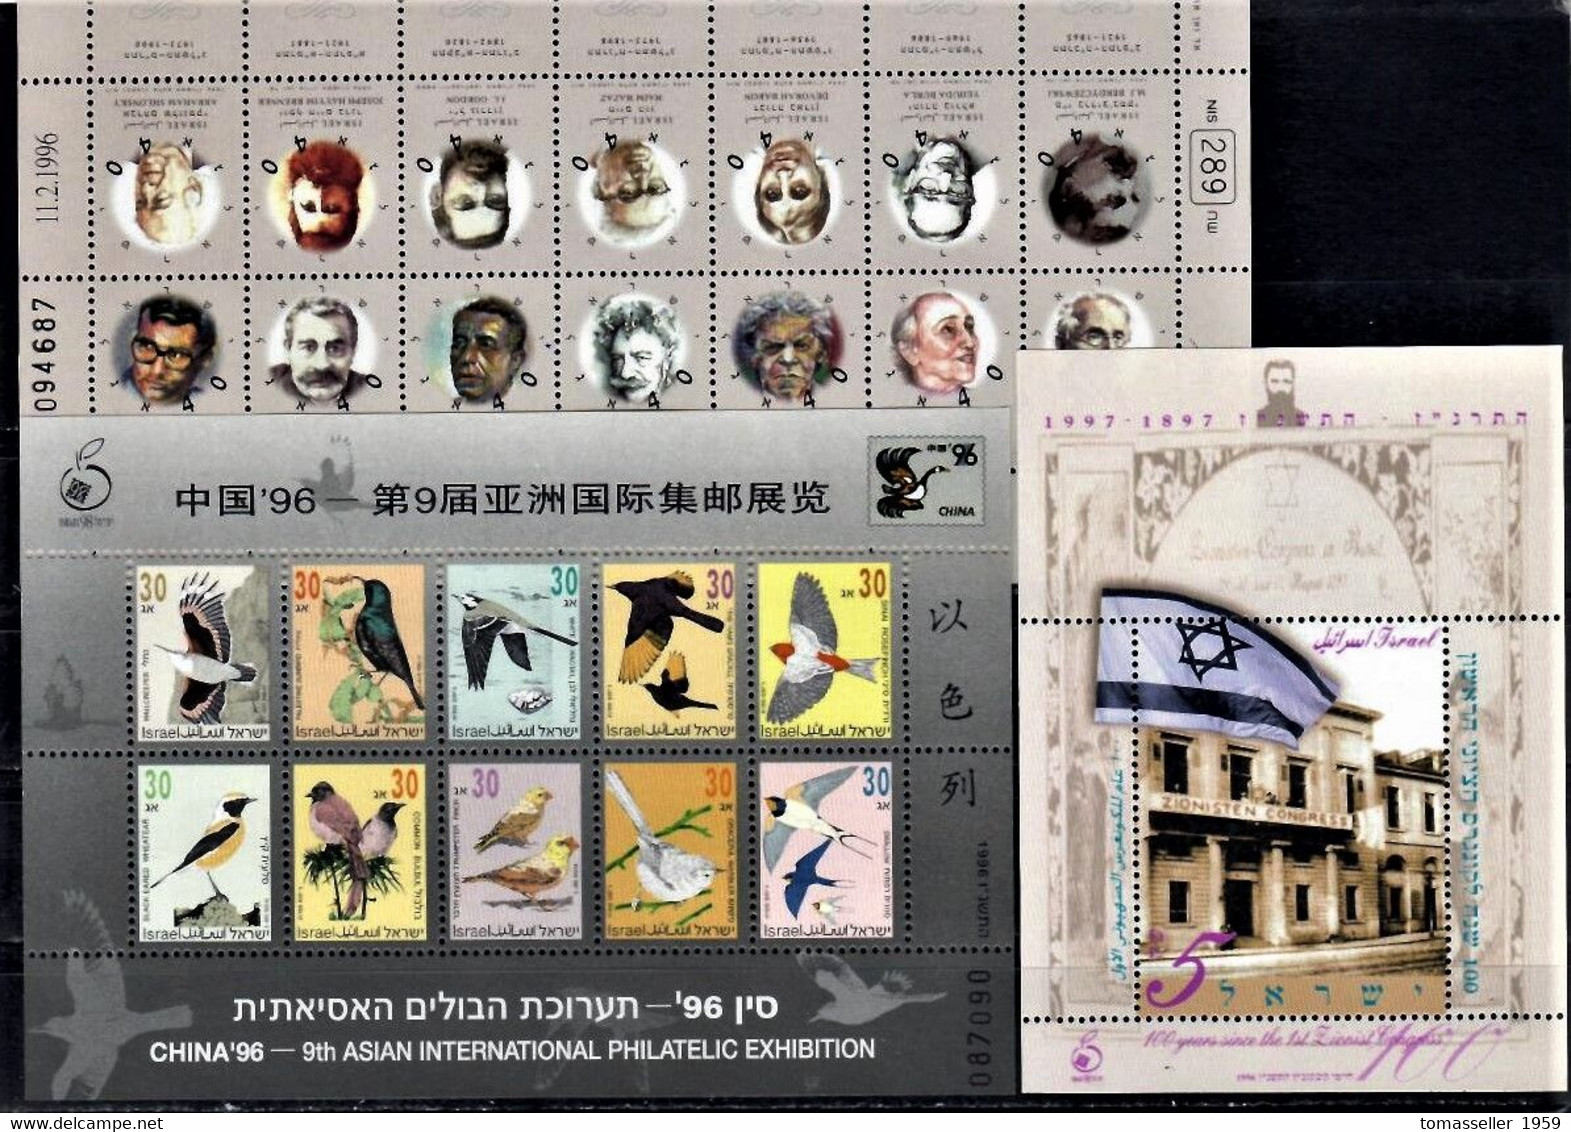 IZRAEL-1996 Full  Year Set.22 Issues.MNH - Années Complètes